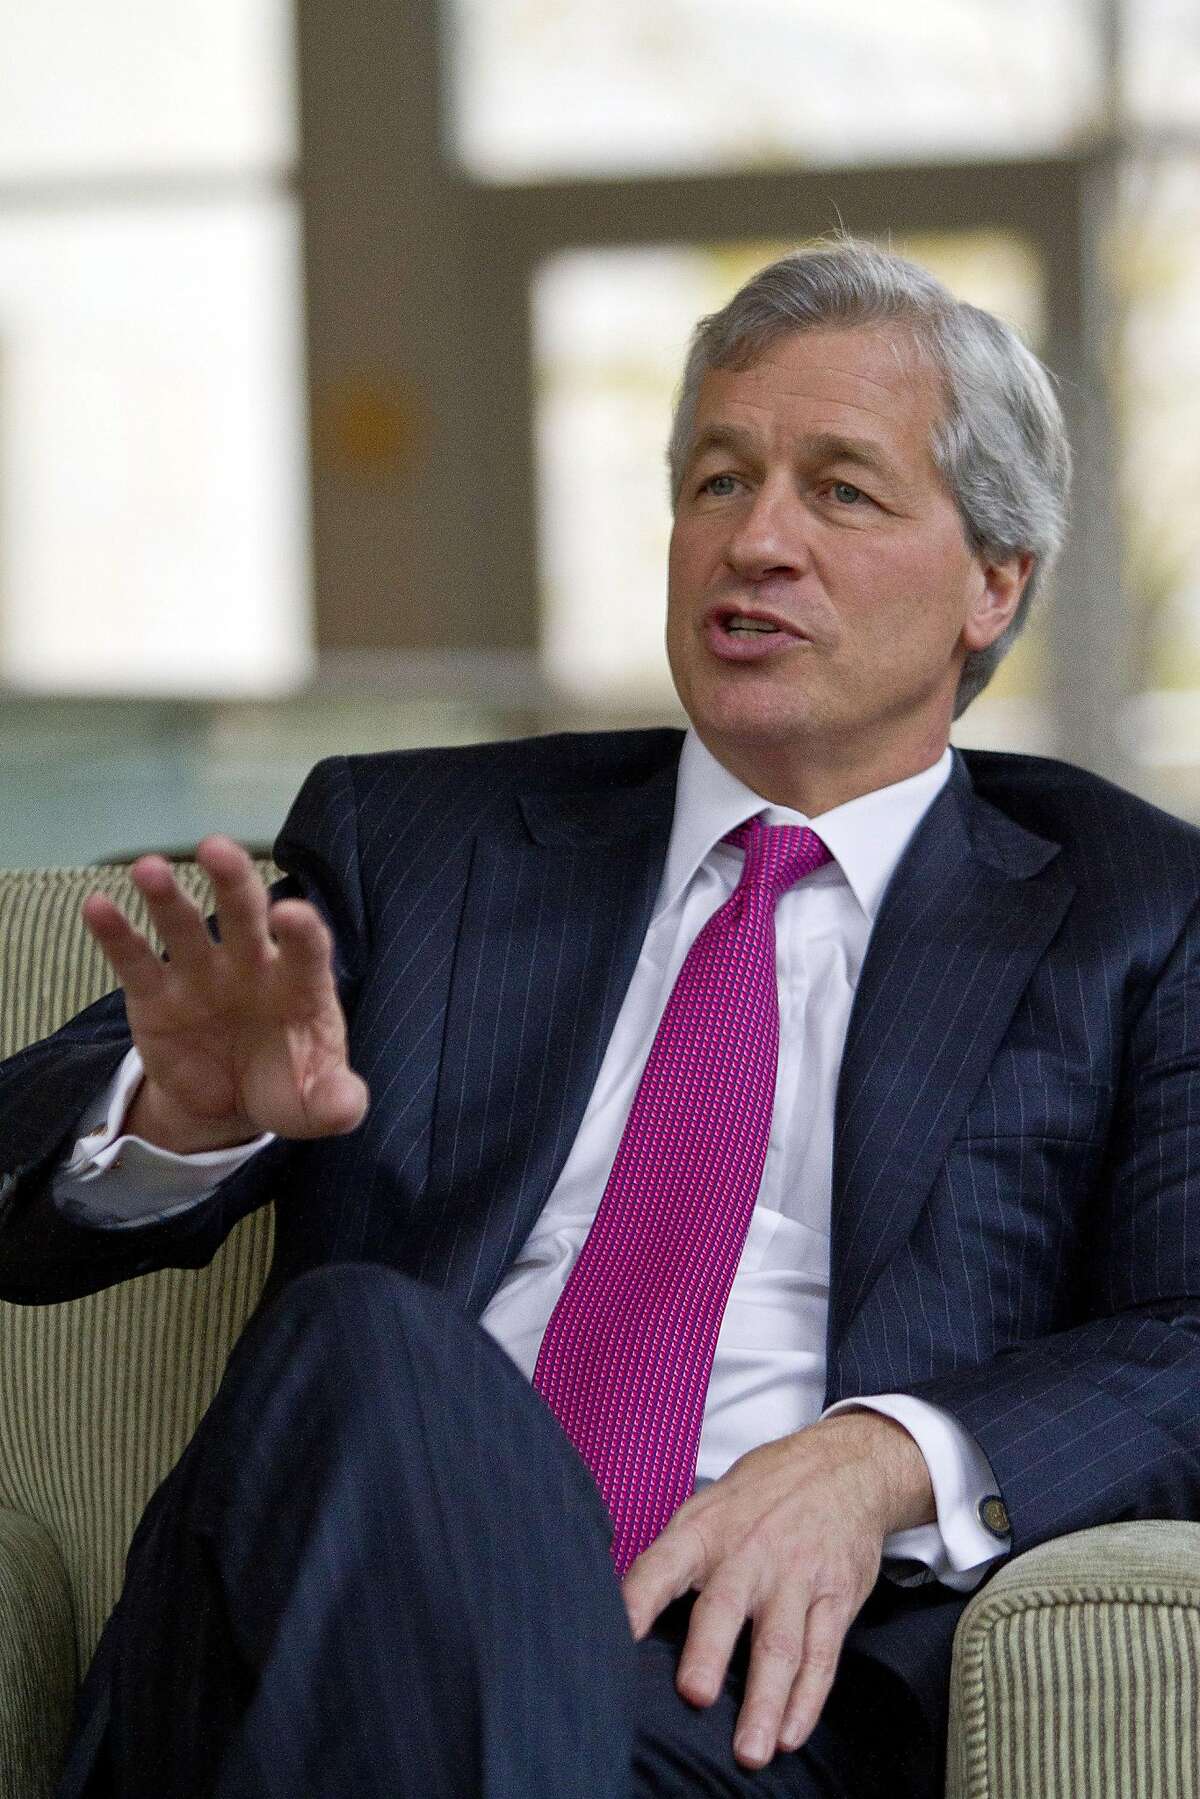 Jamie Dimon, chairman and CEO of JP Morgan Chase, pictured November 2, 2011, in Seattle, Wash. (Dean Rutz/Seattle Times/TNS)